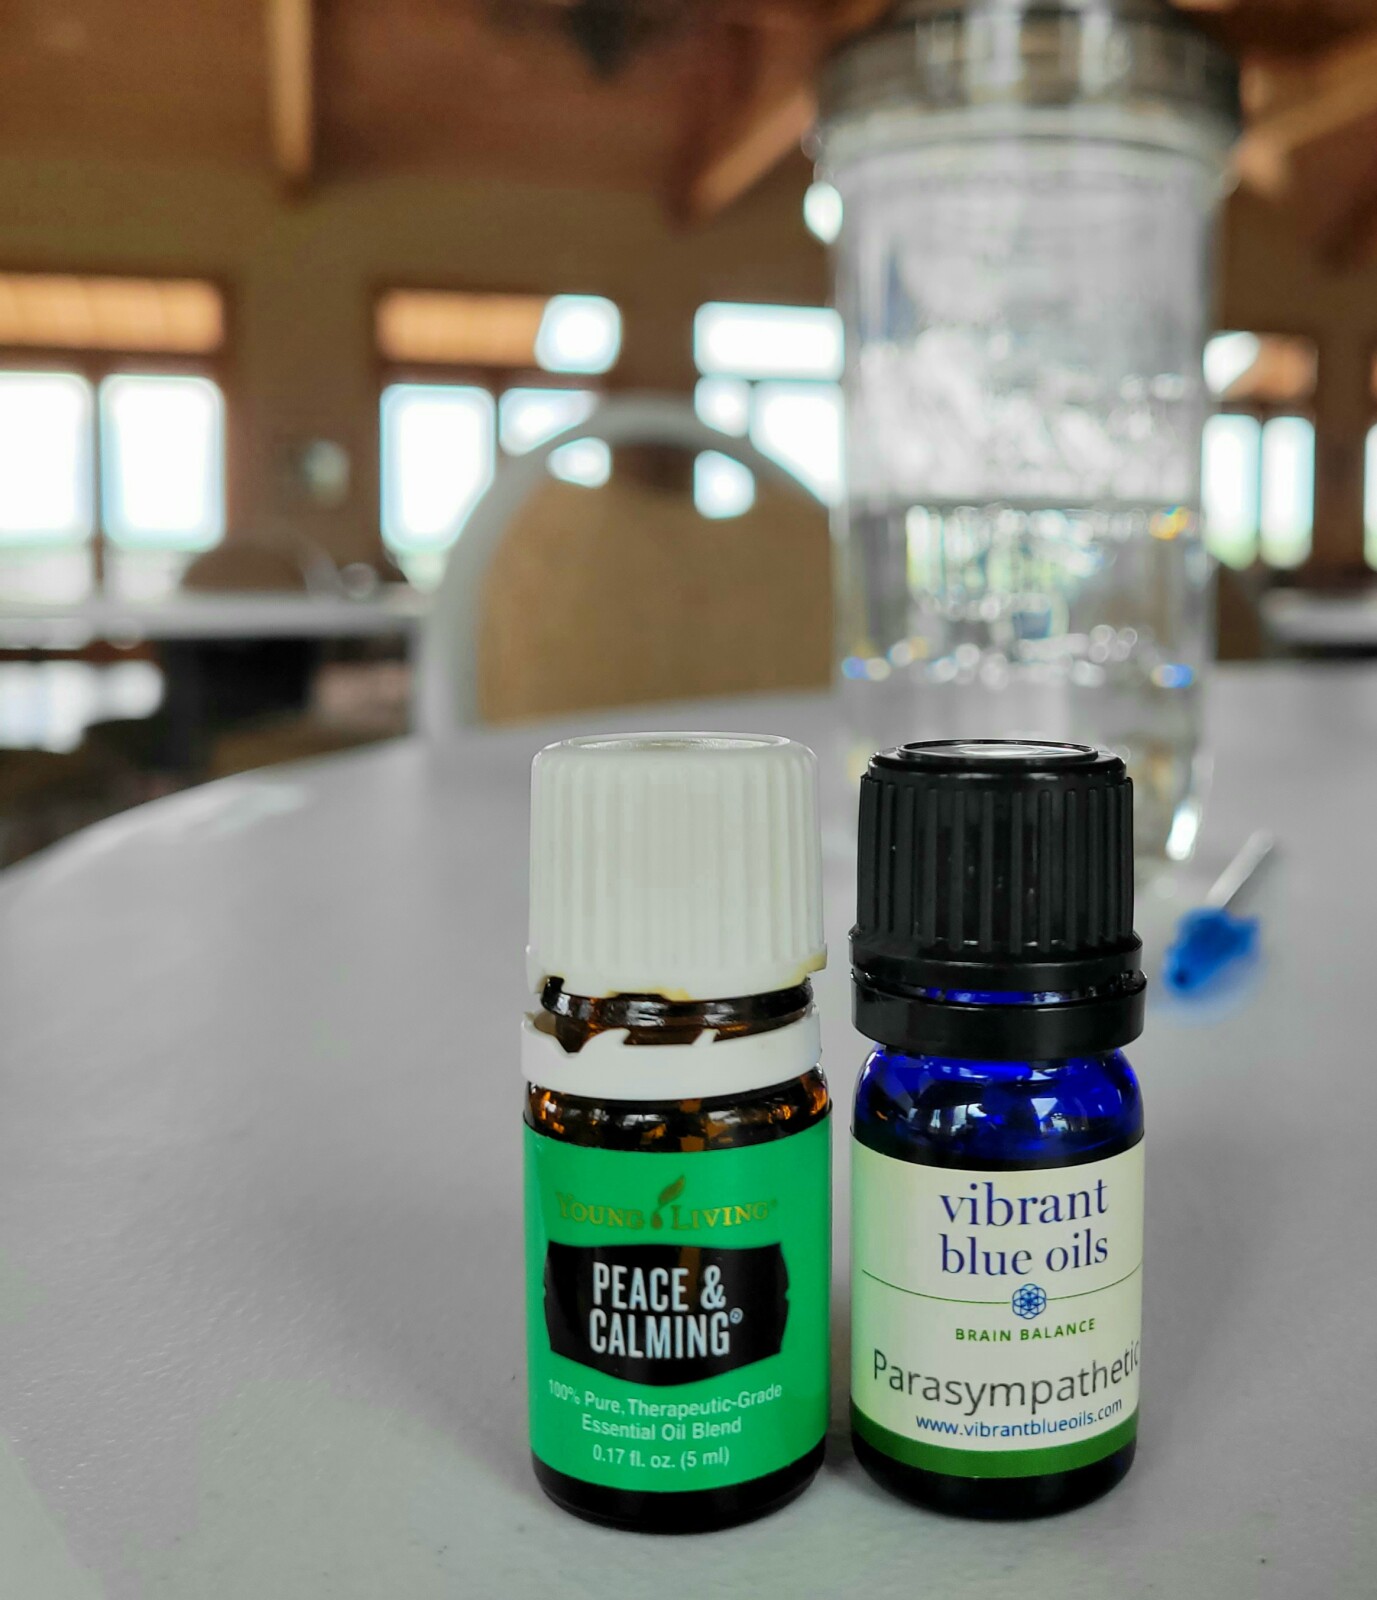 Which Essential Oils Blend Worked Best to Fend Off a Panic Attack